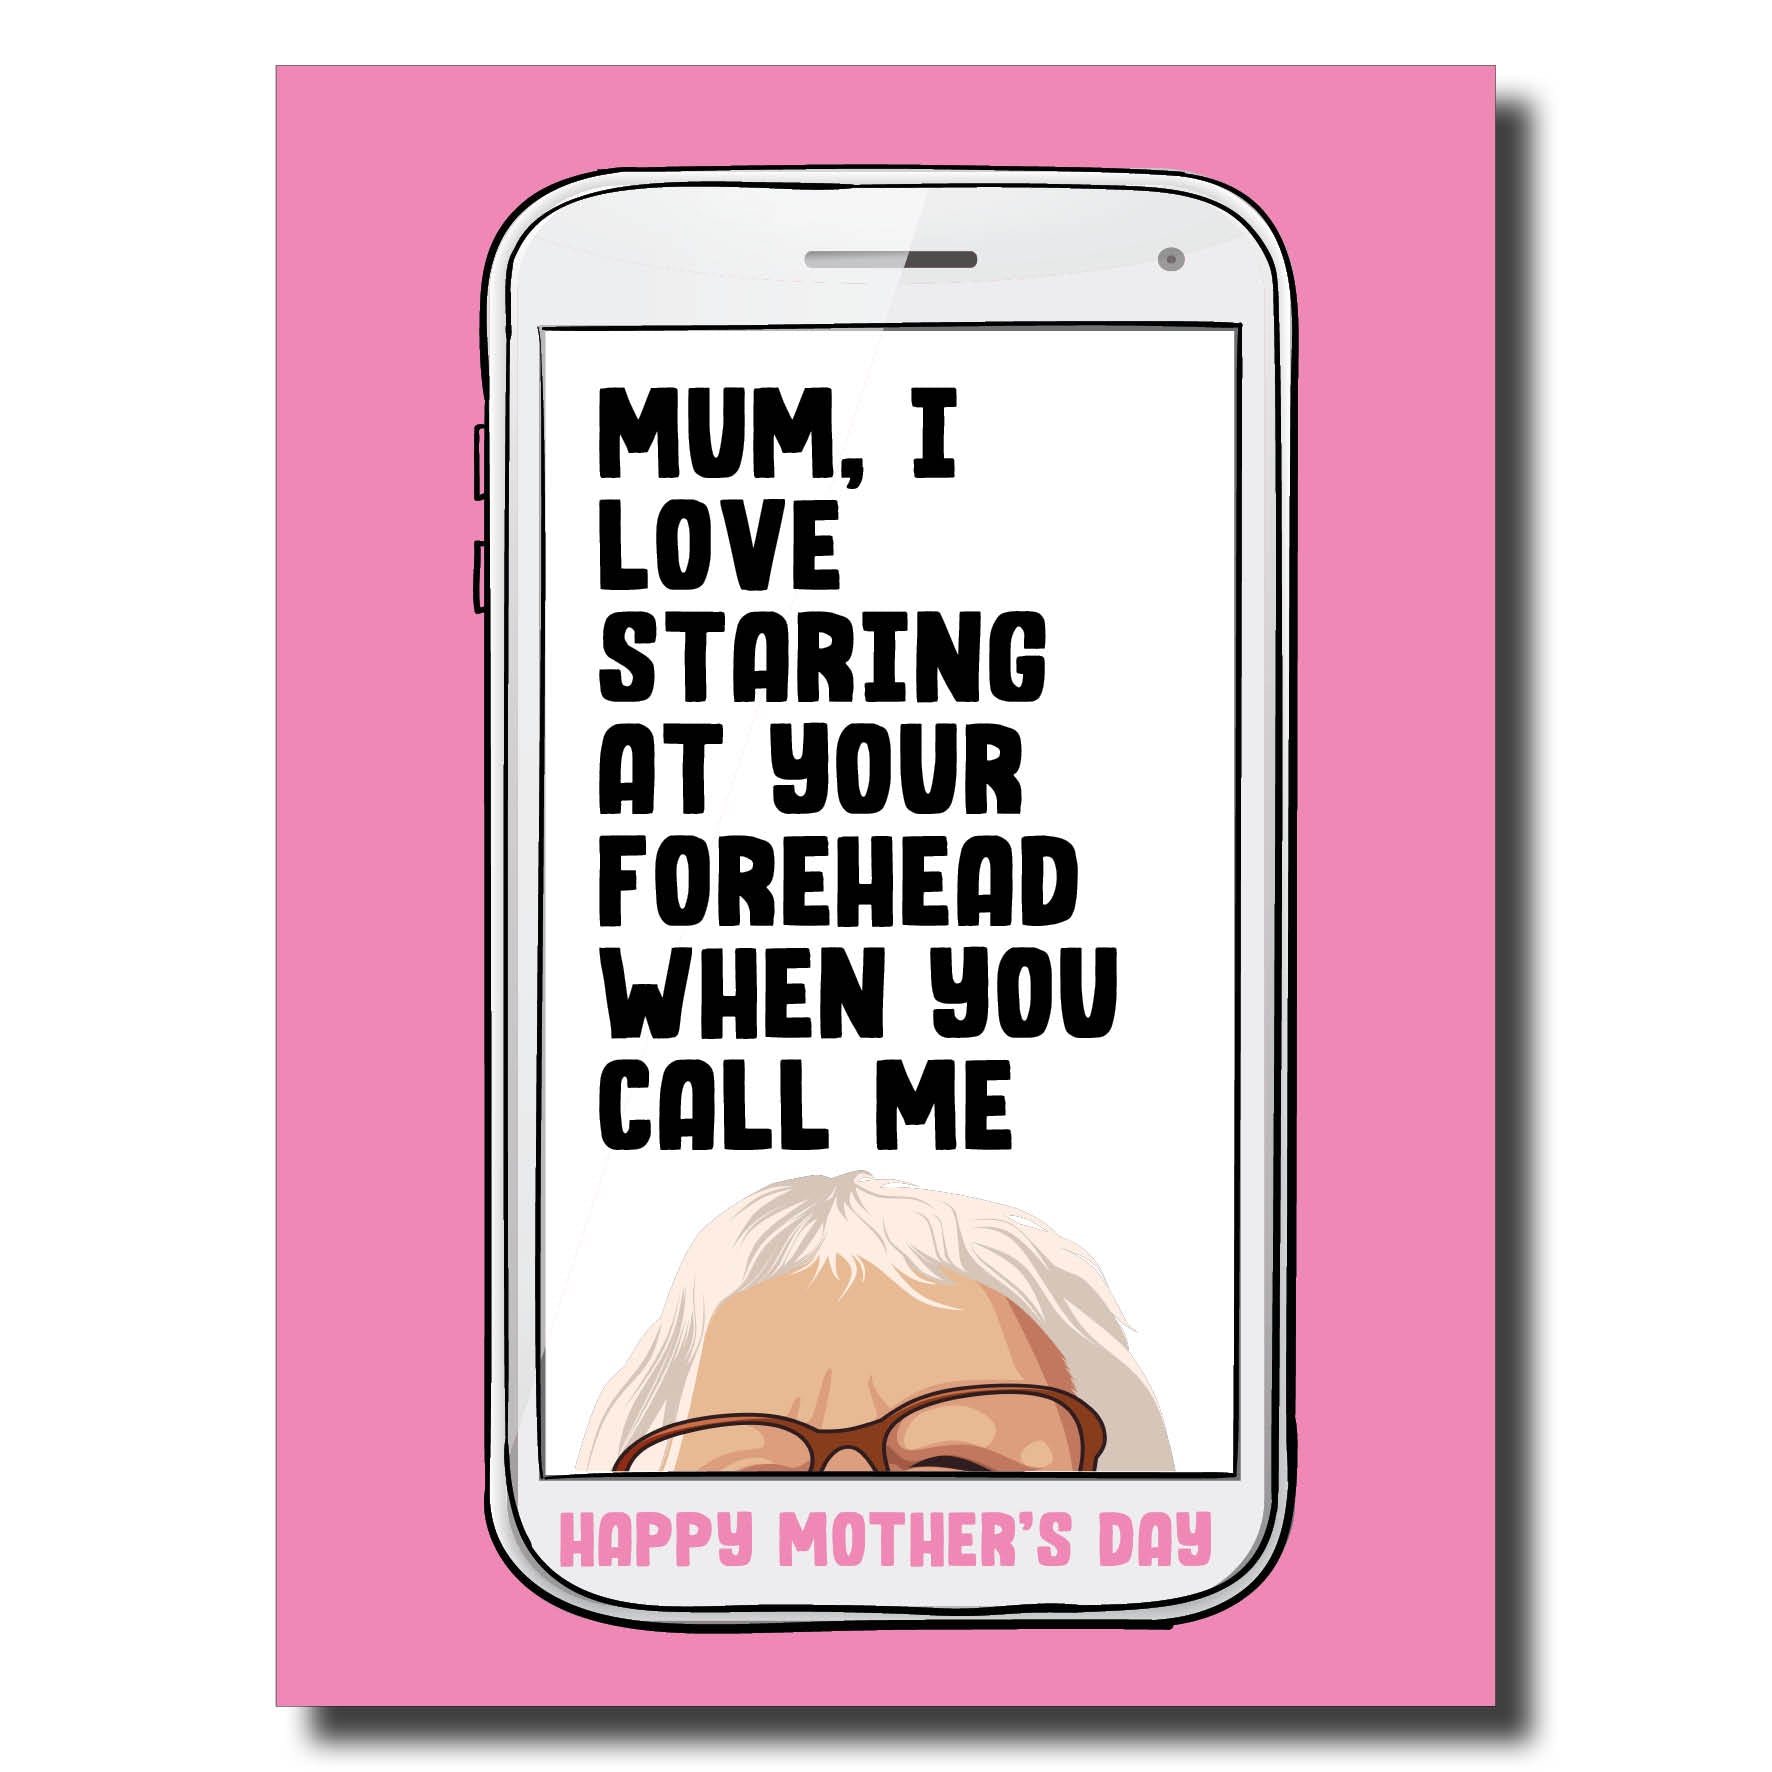 Image of Funny Forehead Mum Card